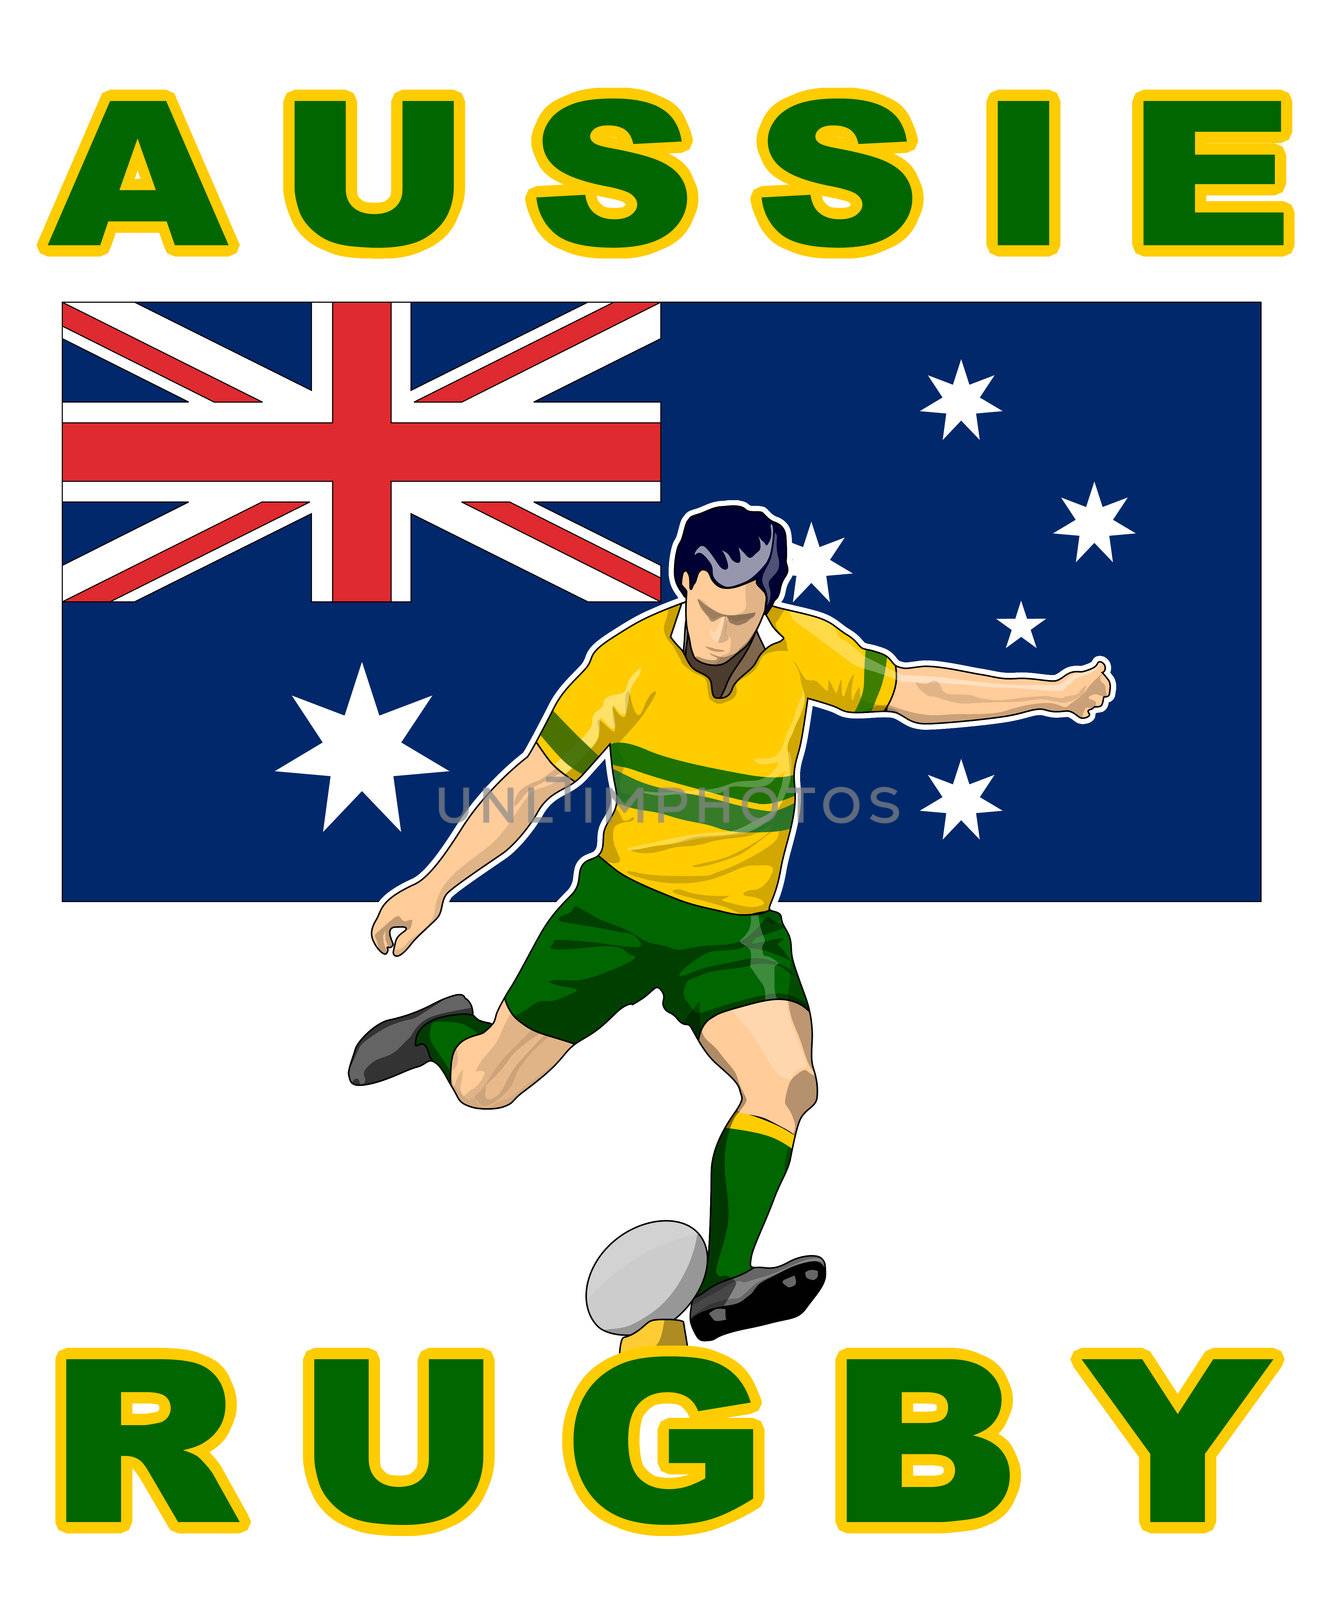 illustration of Rugby player kicking ball front view with Australia flag in background  with words "aussie rugby"